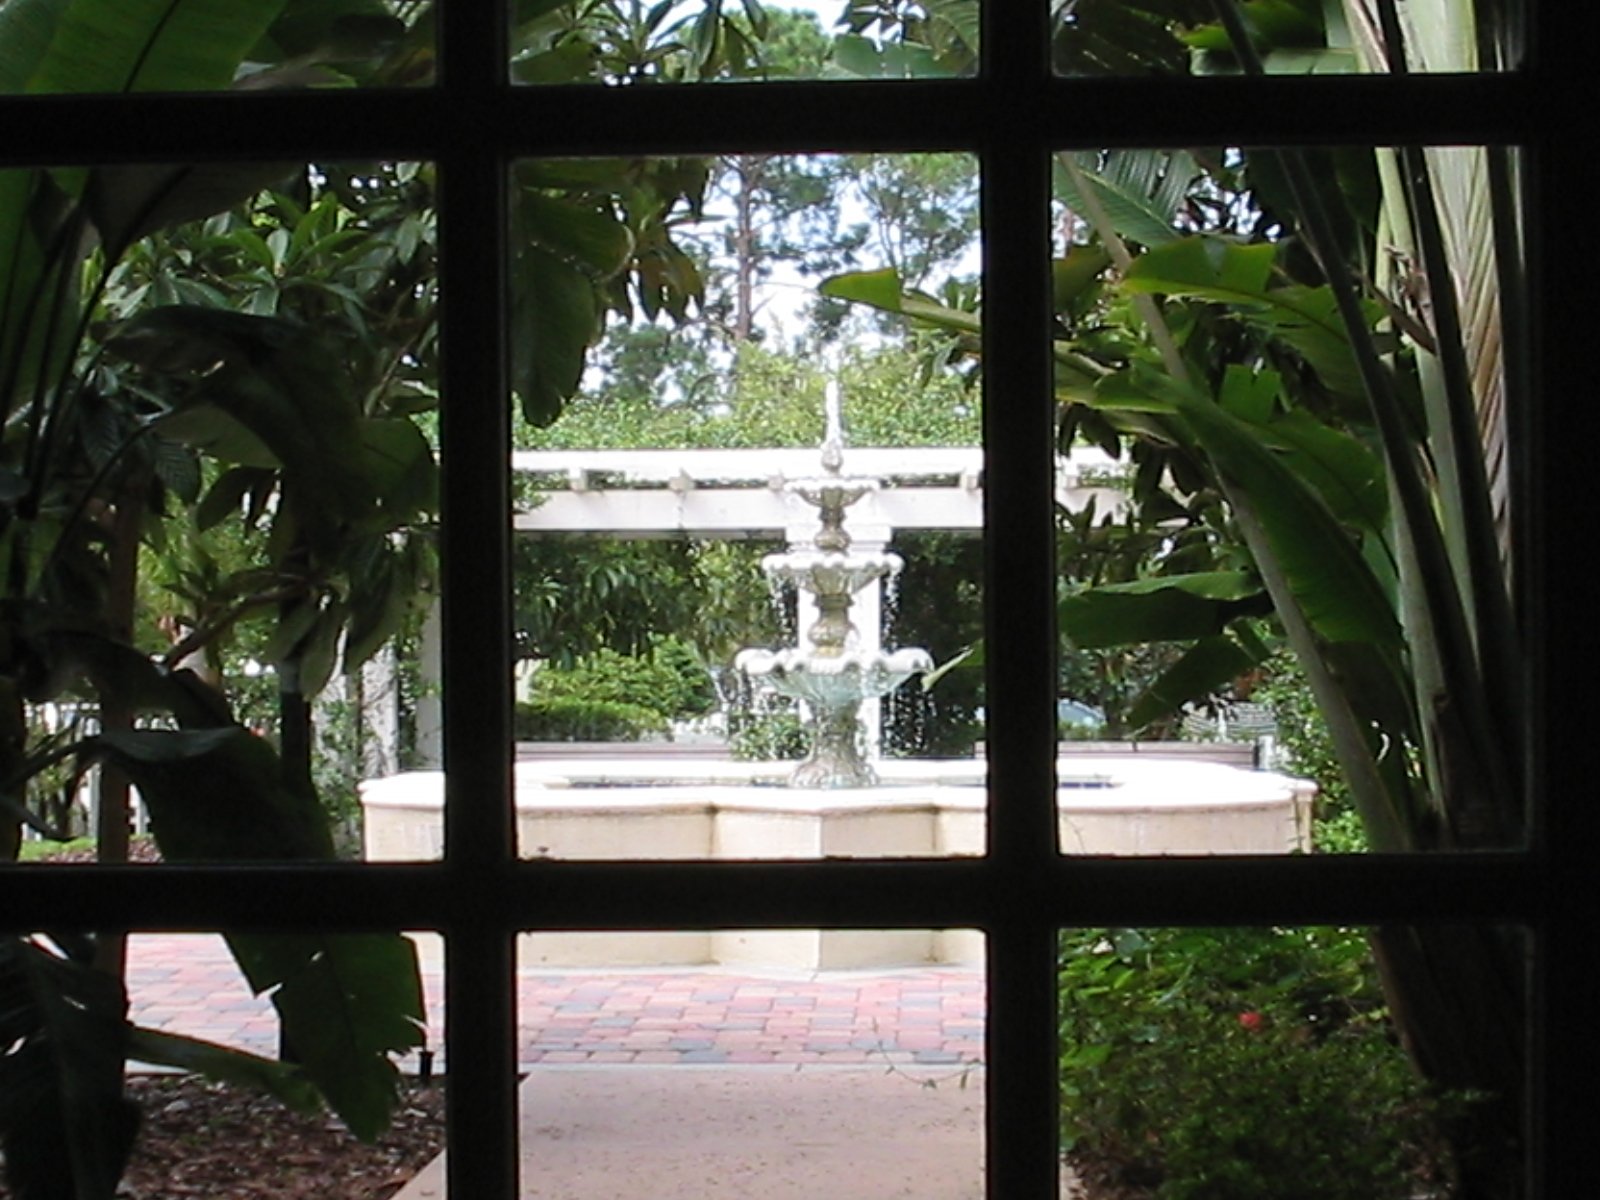 a fountain seen from a window on a patio